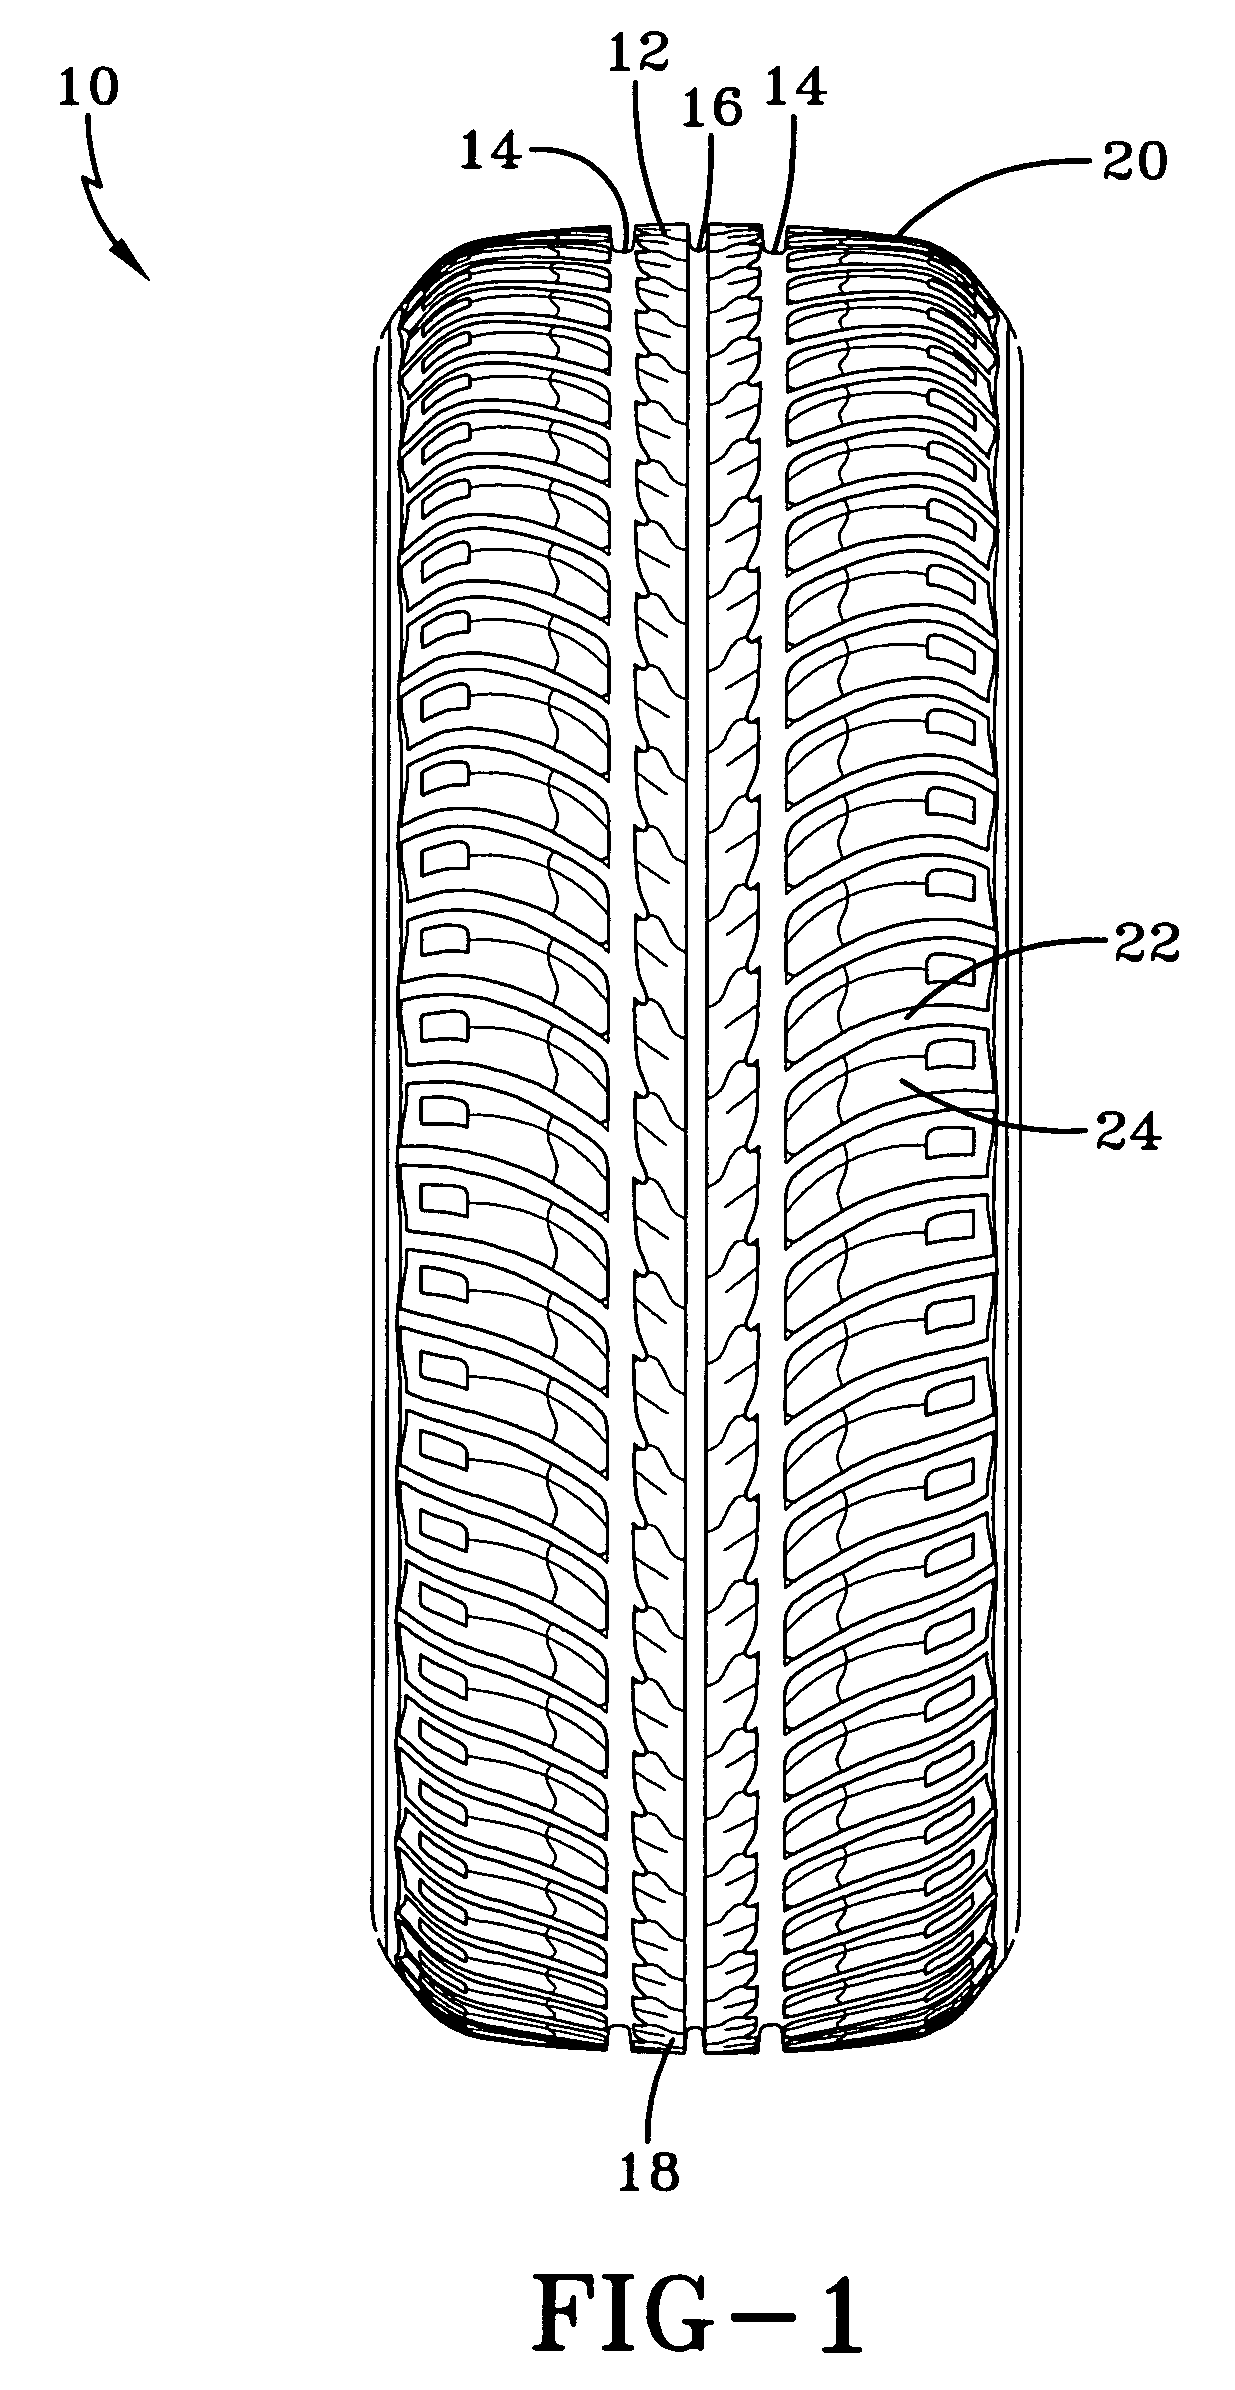 Tire with tread having crossed configuration sipe